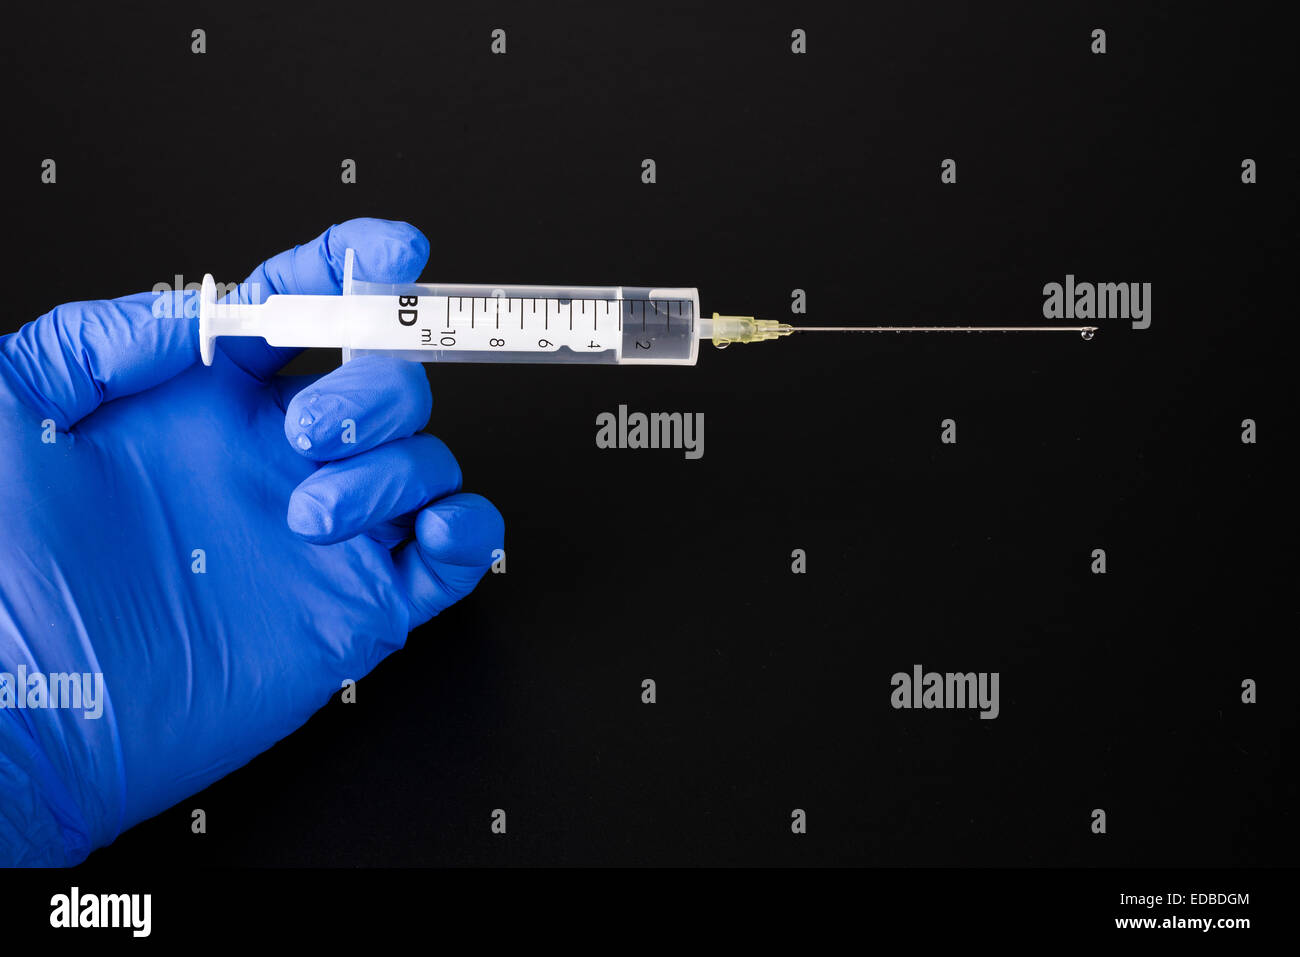 A hand with a blue medical glove is holding a syringe Stock Photo